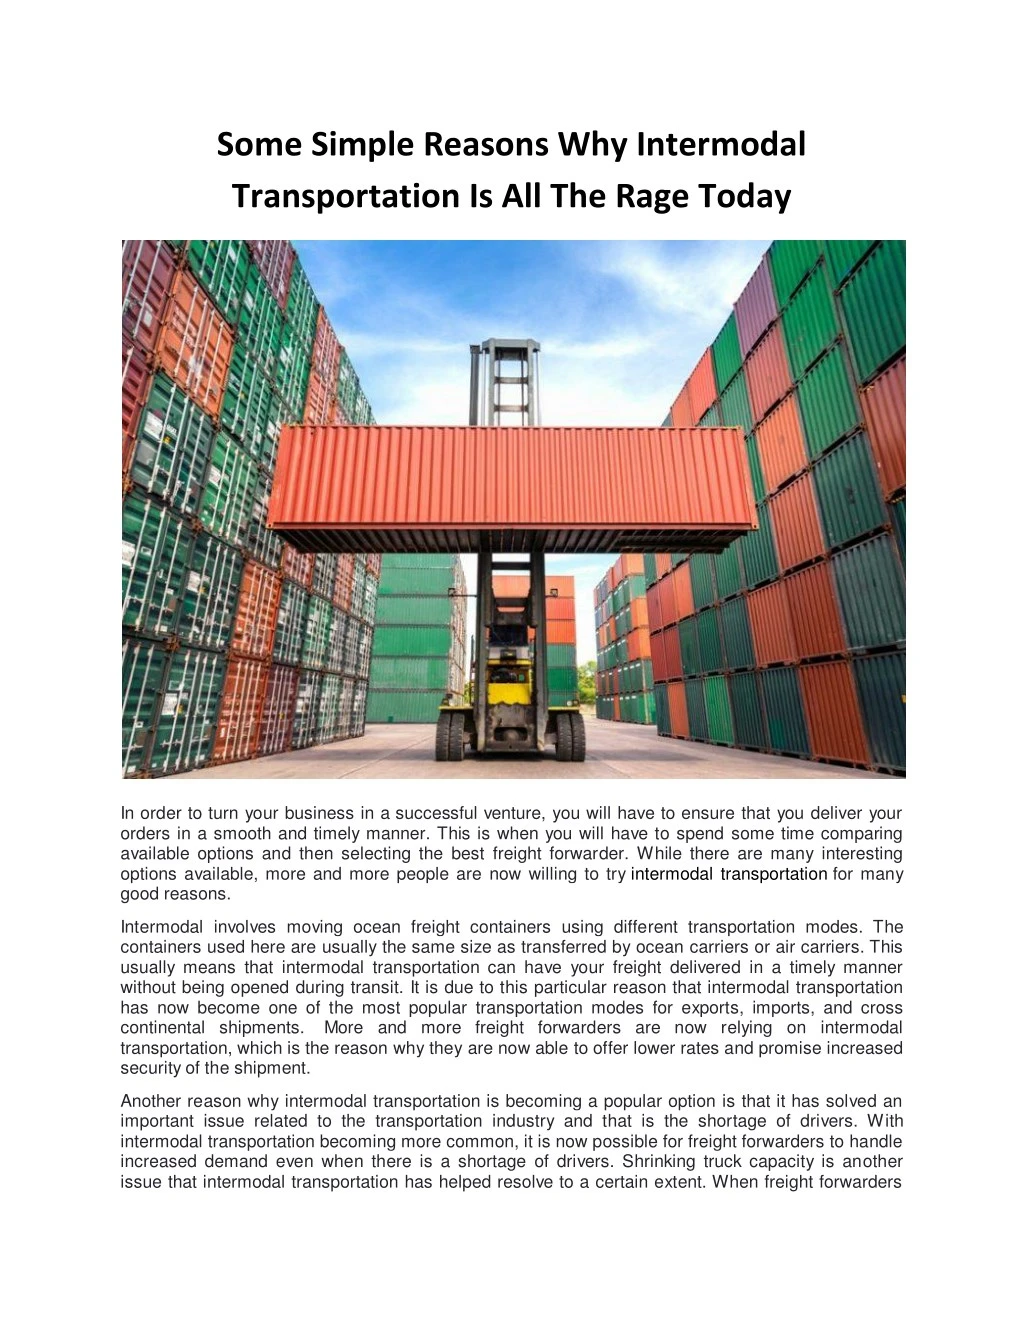 some simple reasons why intermodal transportation